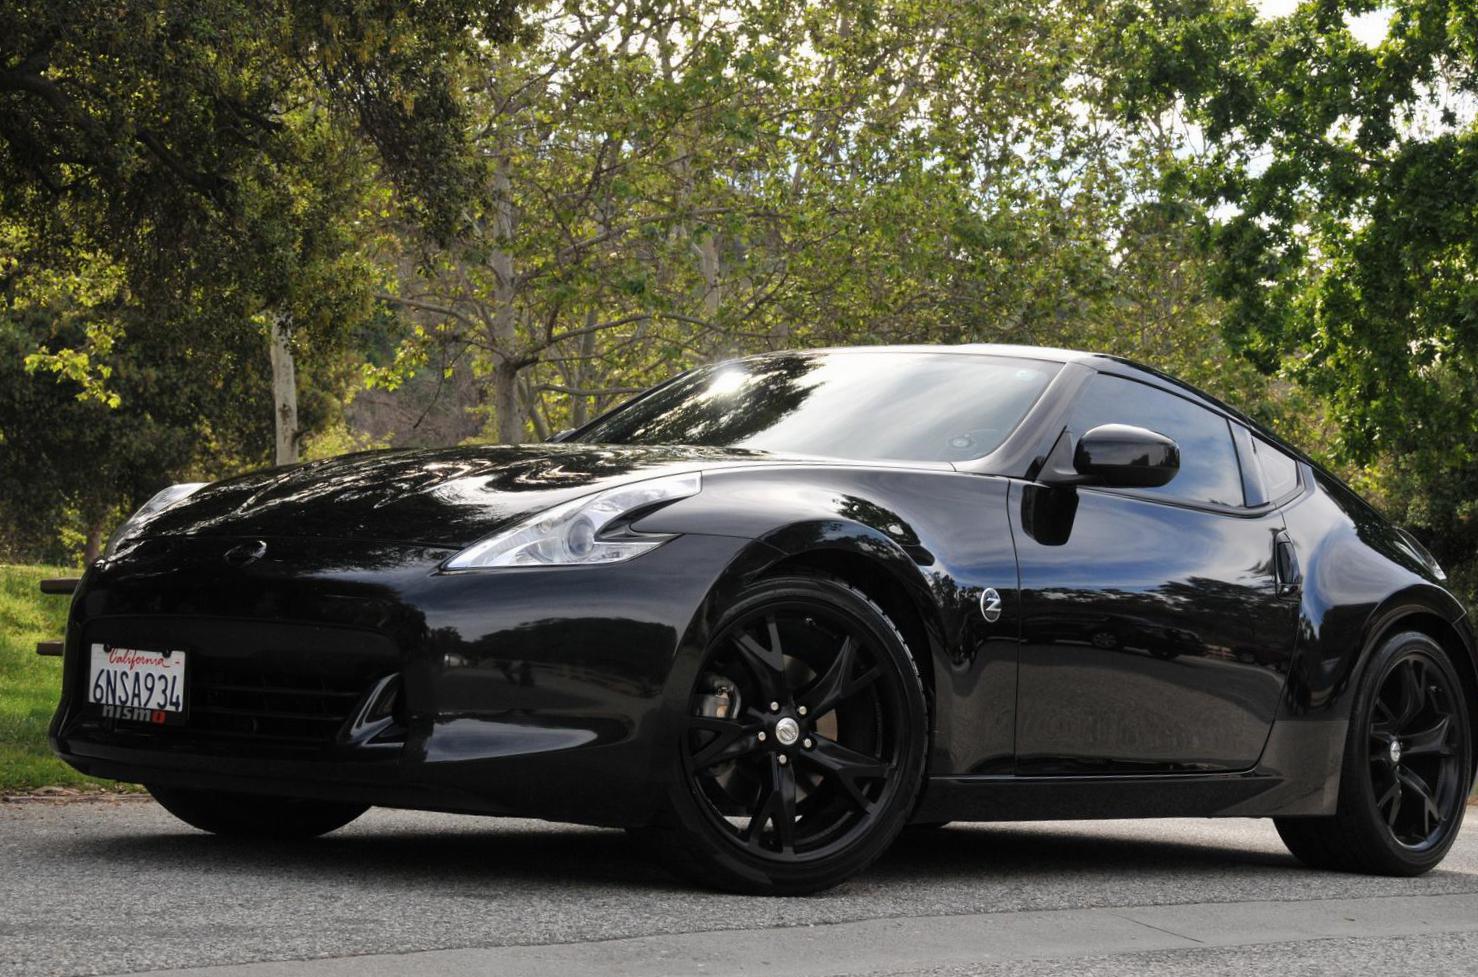 370Z Nissan for sale 2010